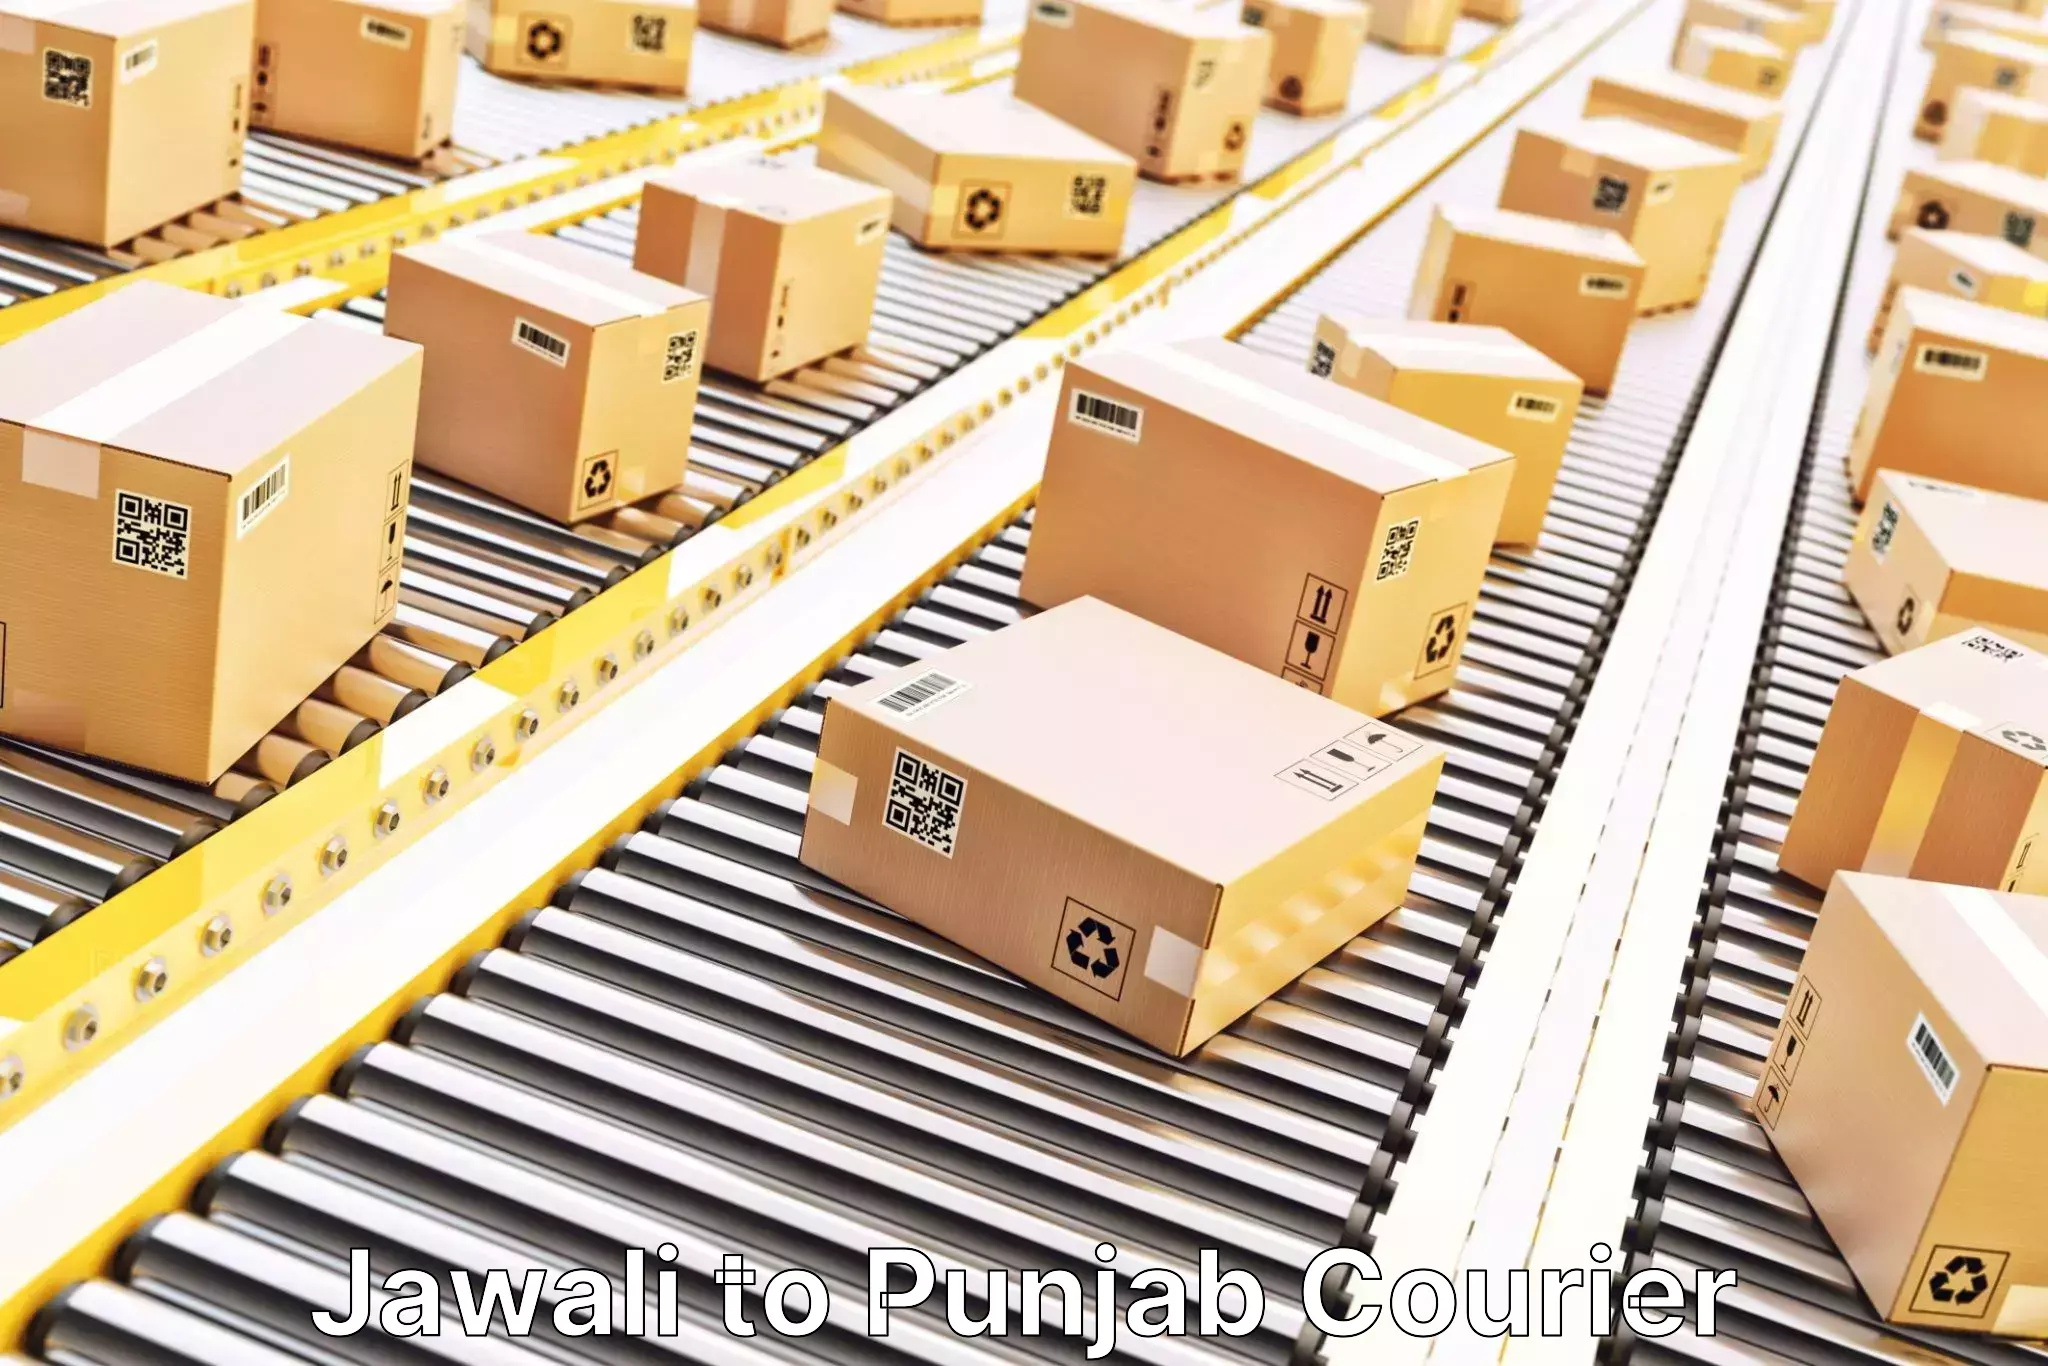 Customer-oriented courier services Jawali to Batala